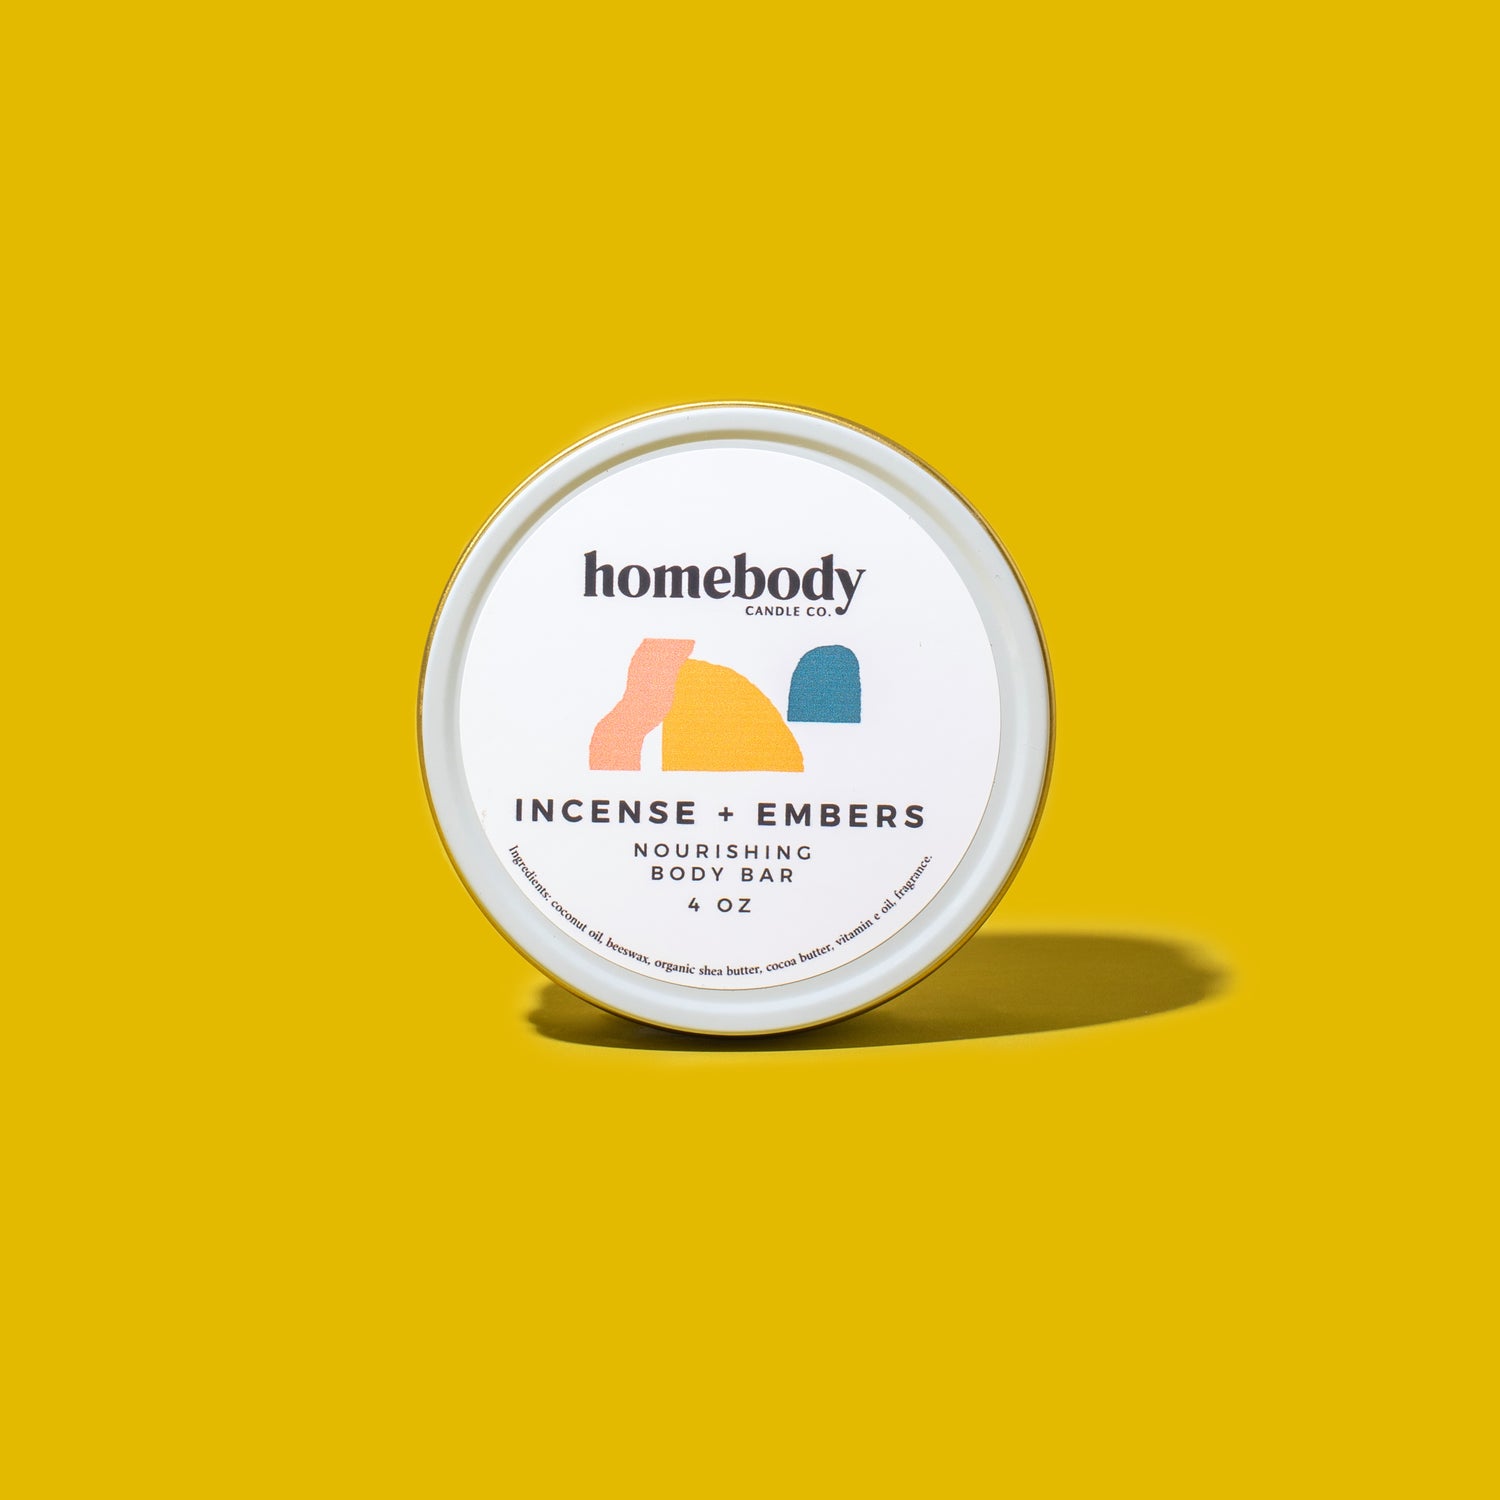 Incense + Embers ✸ fall collection body bar Homebody Candle Co